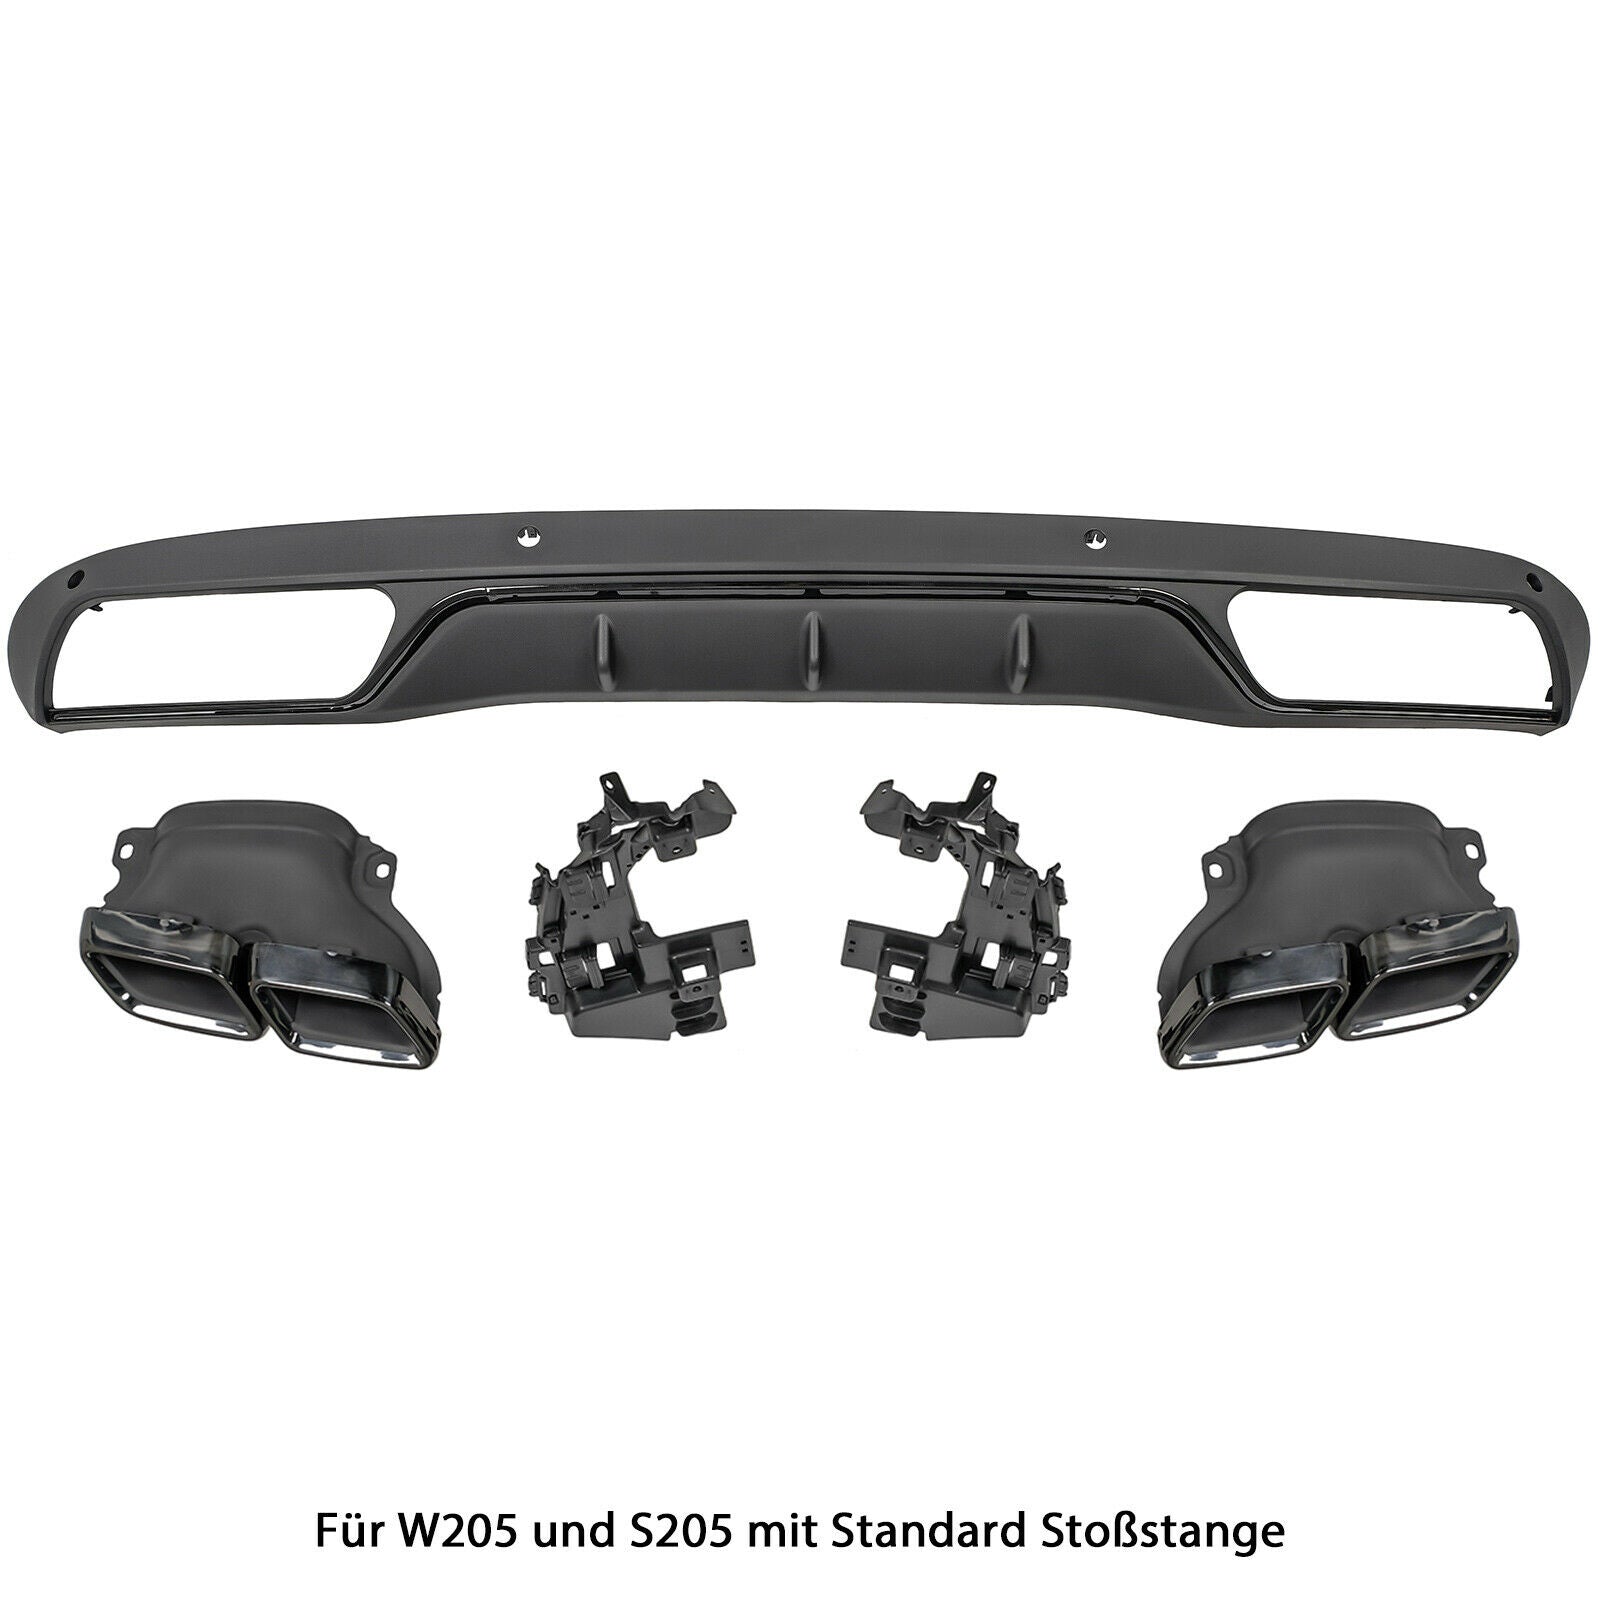 Rear Diffuser Diffuser Double Pipe Fits for Mercedes C class W205 S205 black